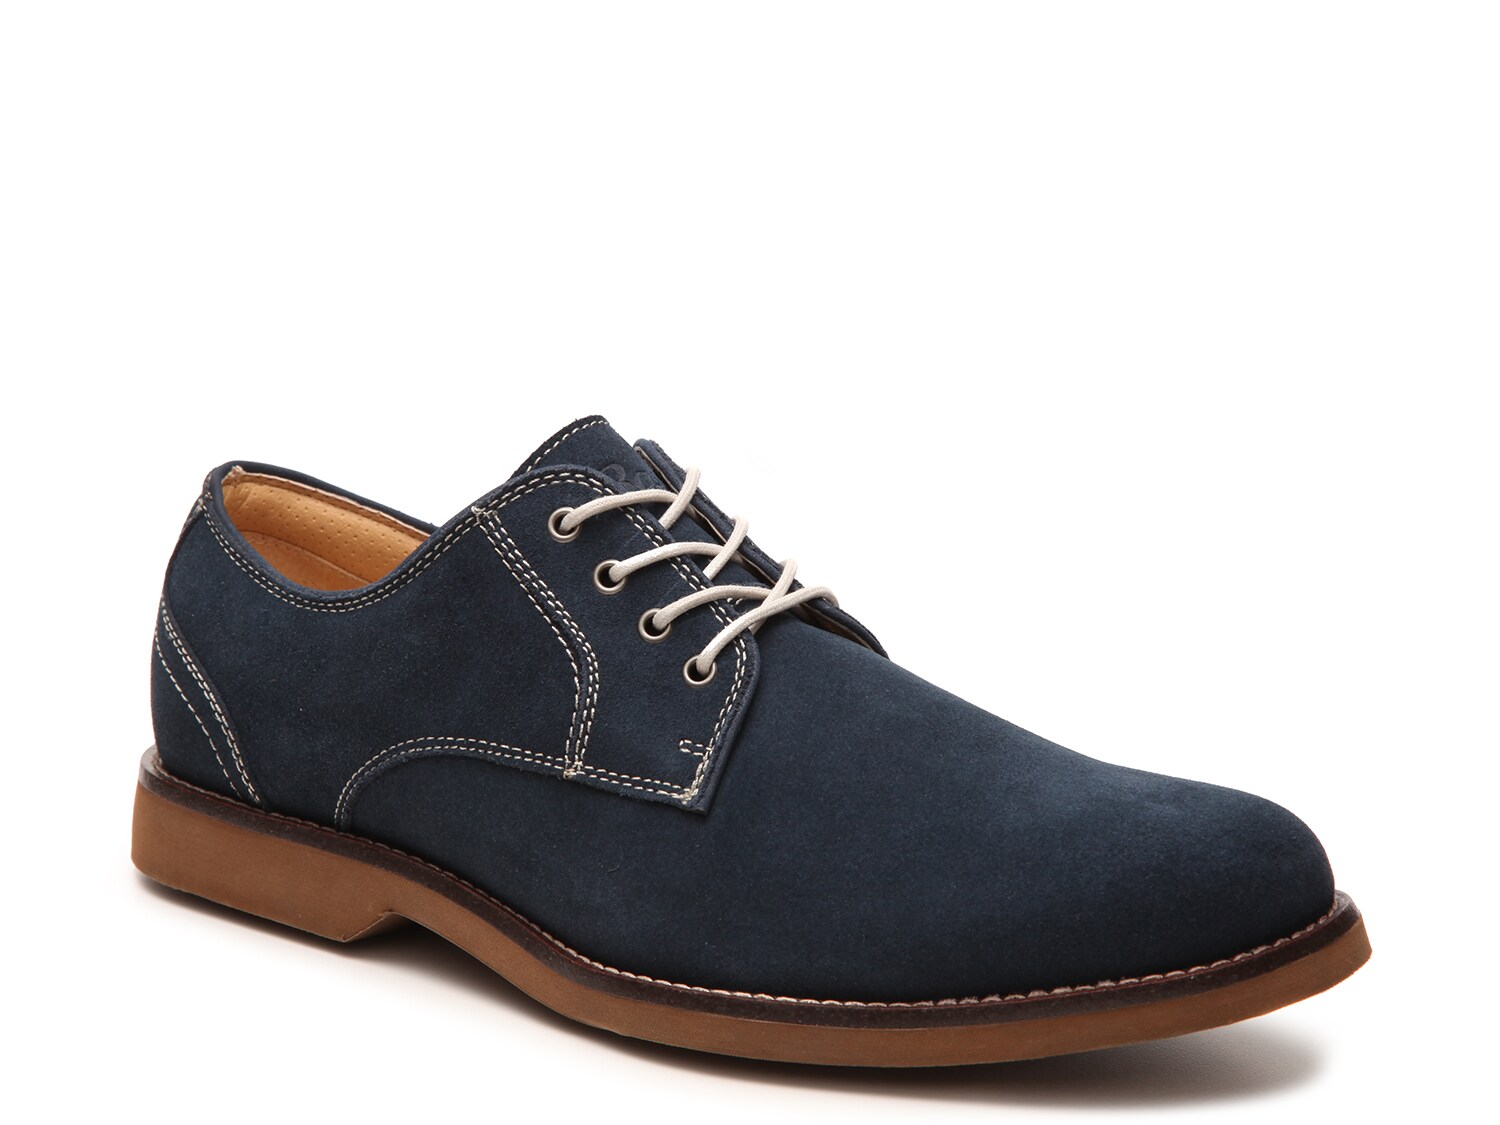 G.H. Bass & Co. Proctor Oxford | DSW